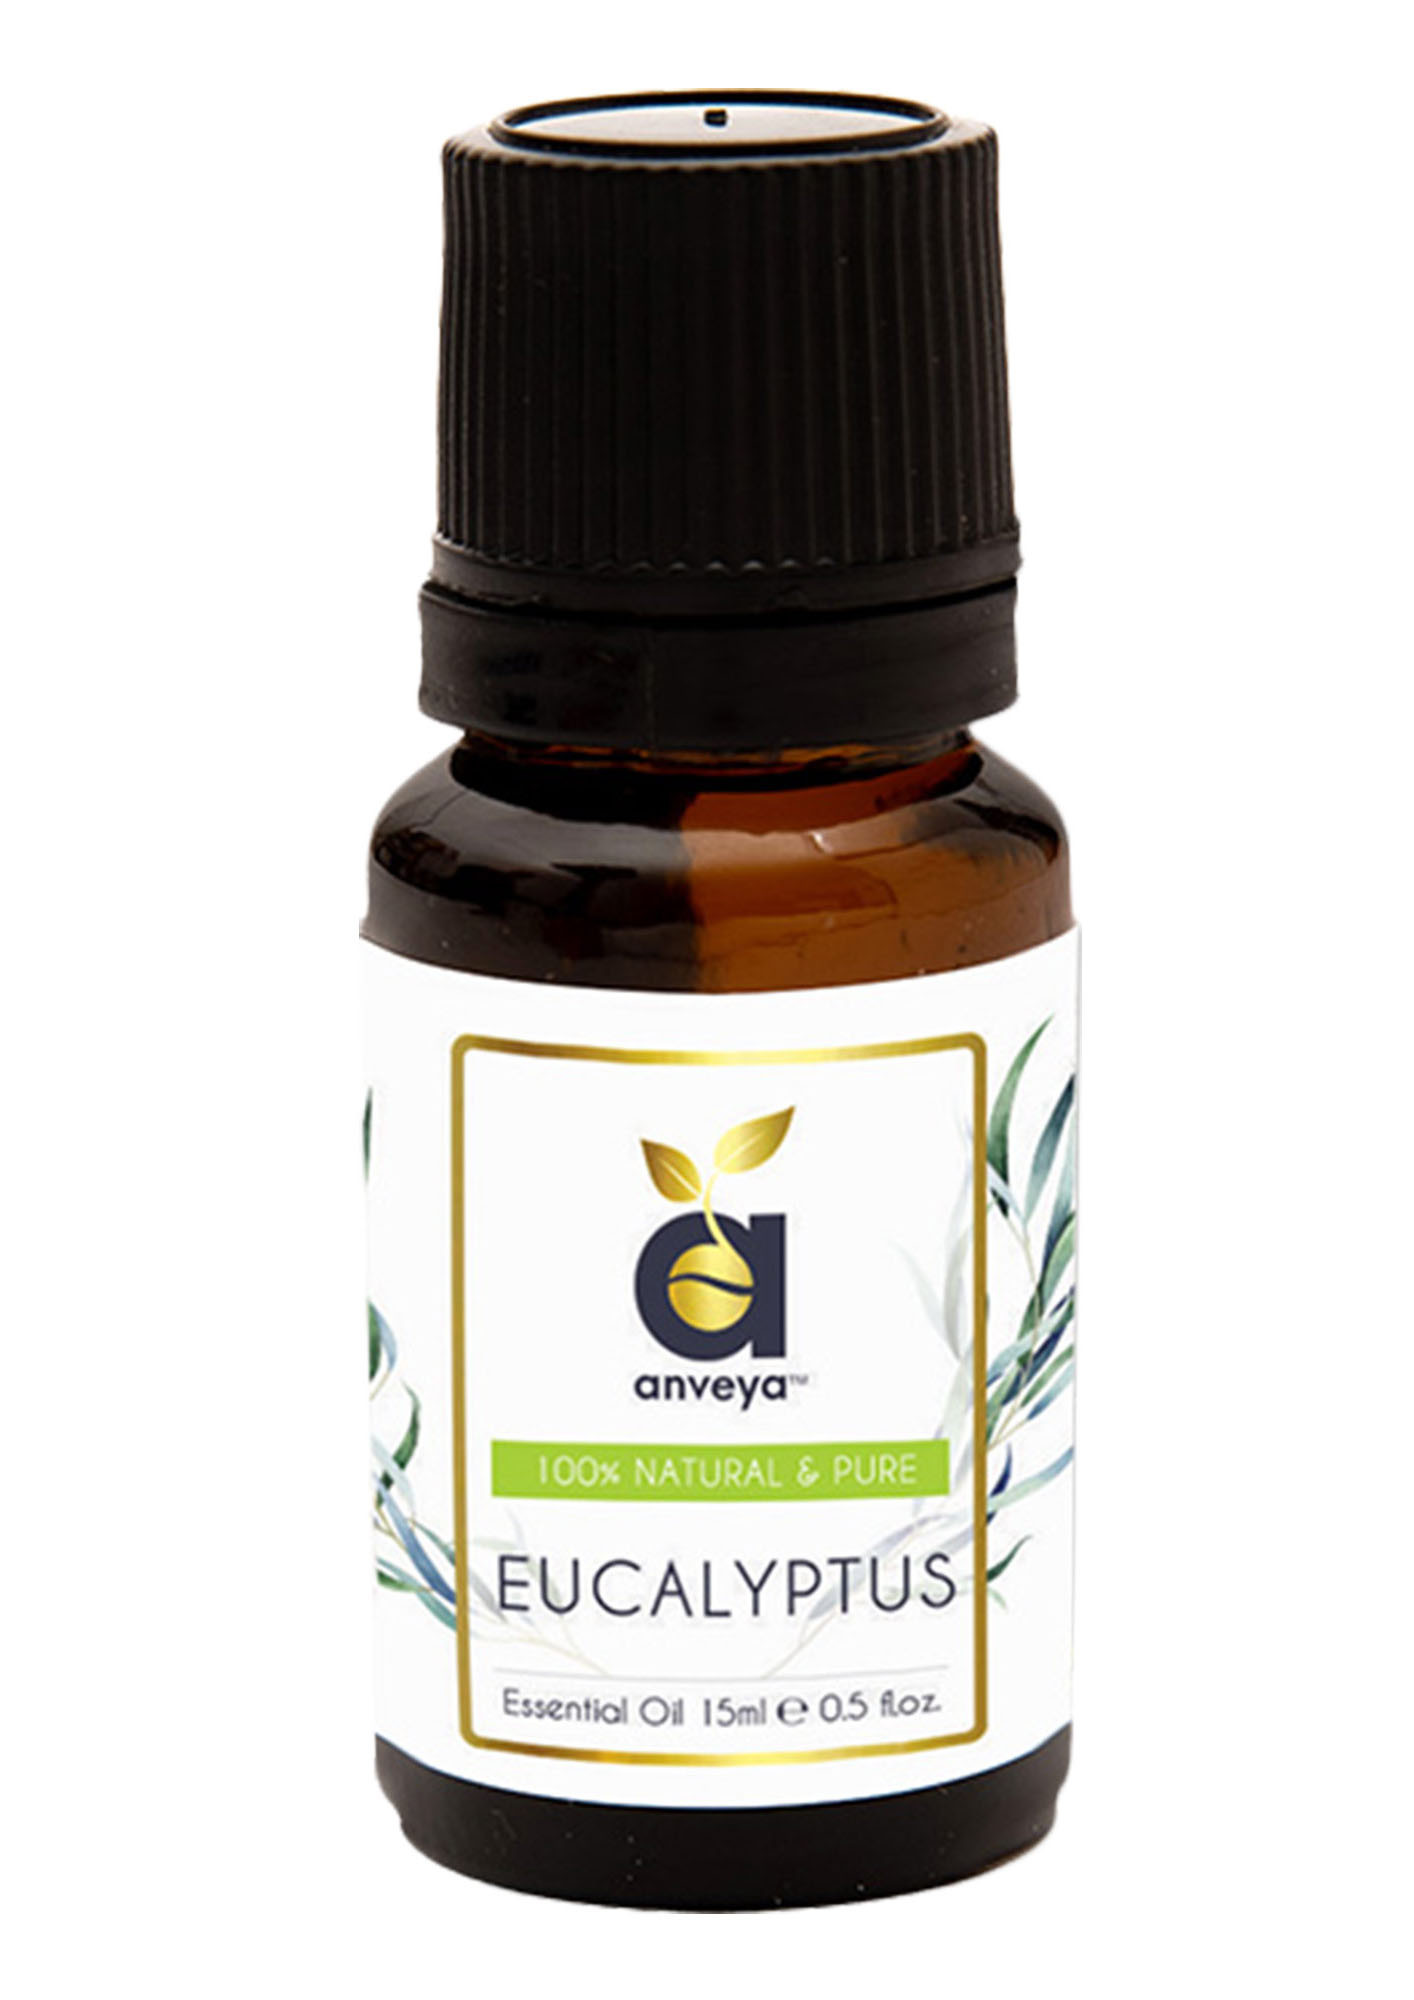 Anveya Eucalyptus Essential Oil, 100% Natural, For Steam Inhalation, Diffuser, Cold, Cough & Beauty